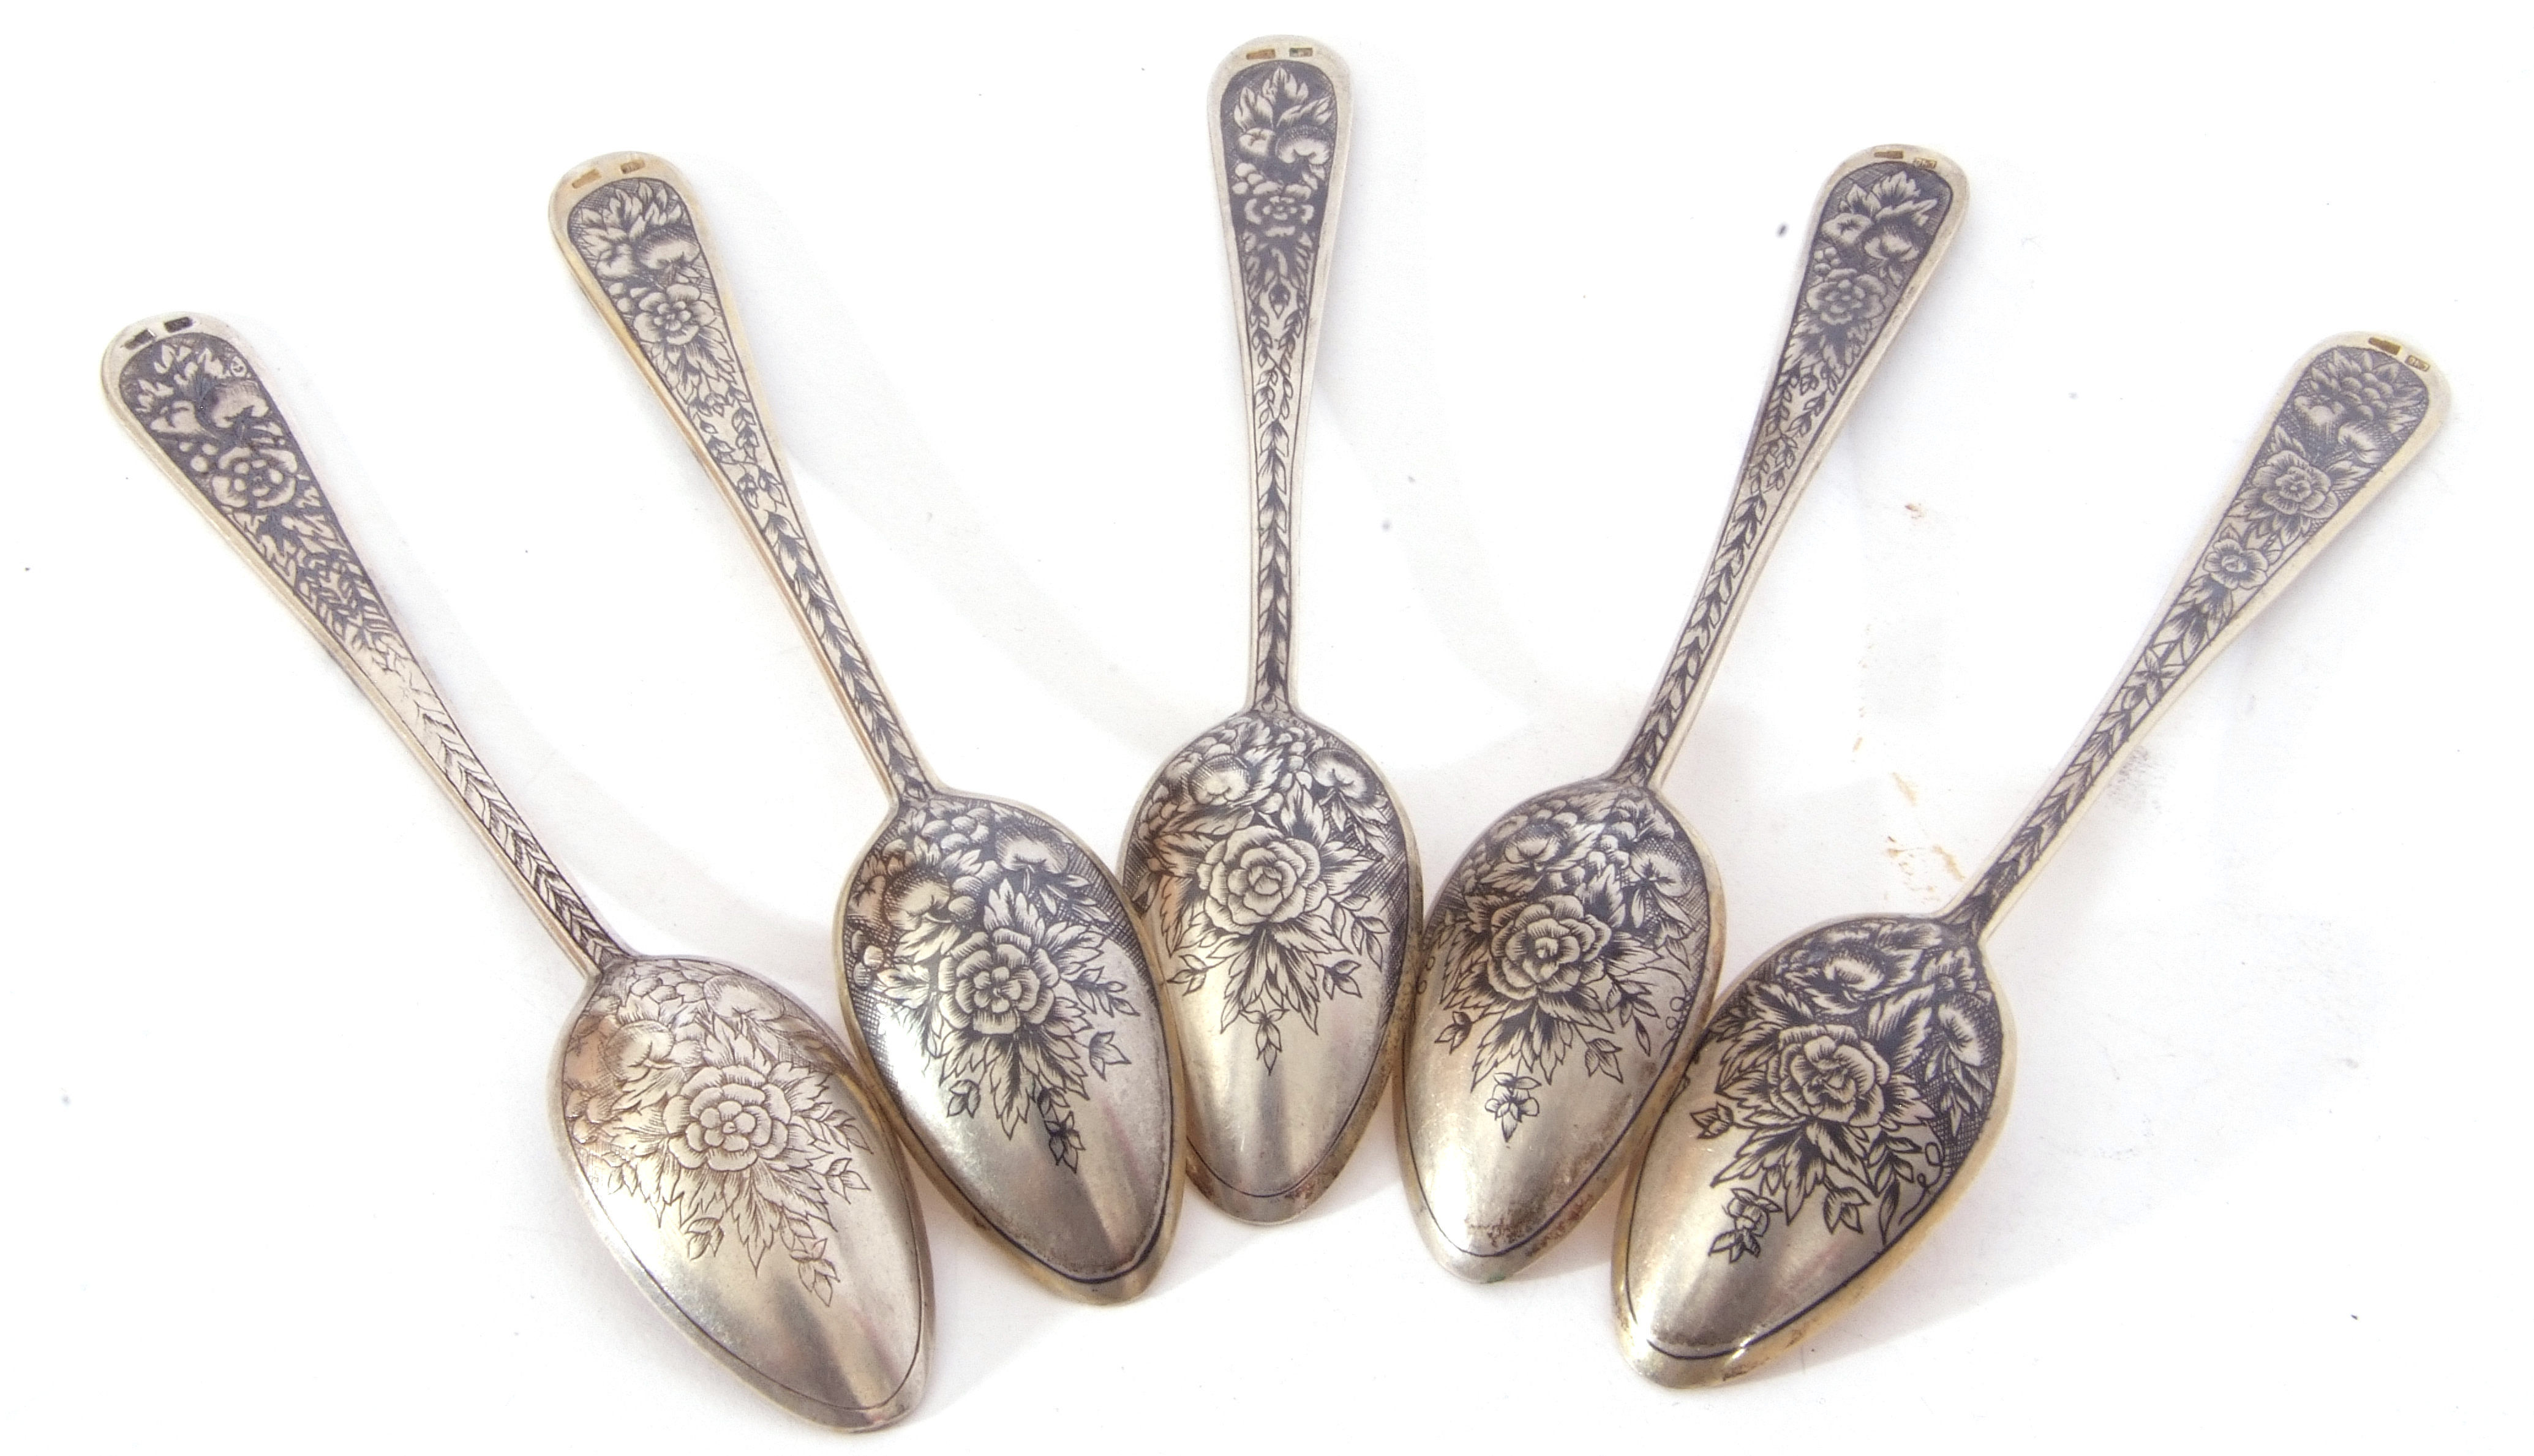 Set of five white metal and niello decorated tea spoons, possibly Russian, no makers marks apparent - Image 4 of 4